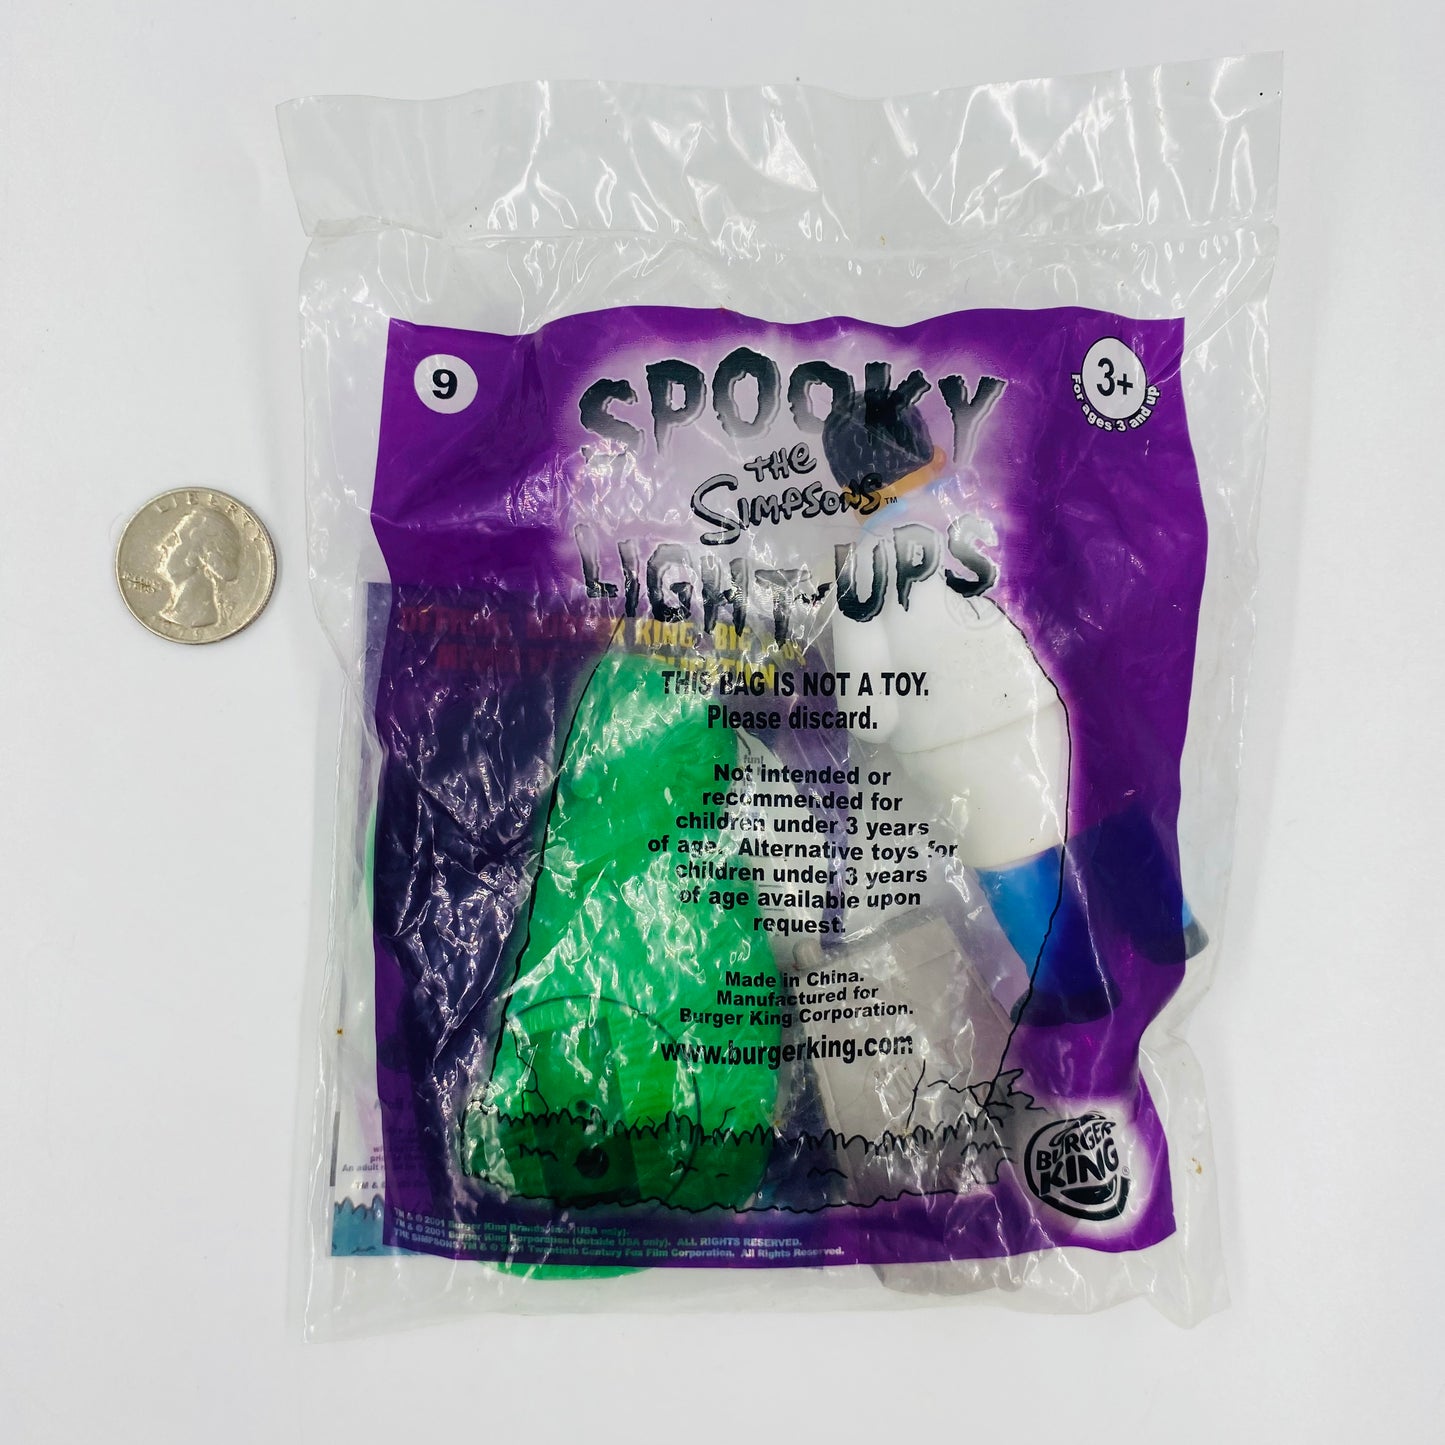 The Simpsons Spooky Light-Ups Dr. Hibbert Burger King Kids' Meals toy (2001) bagged